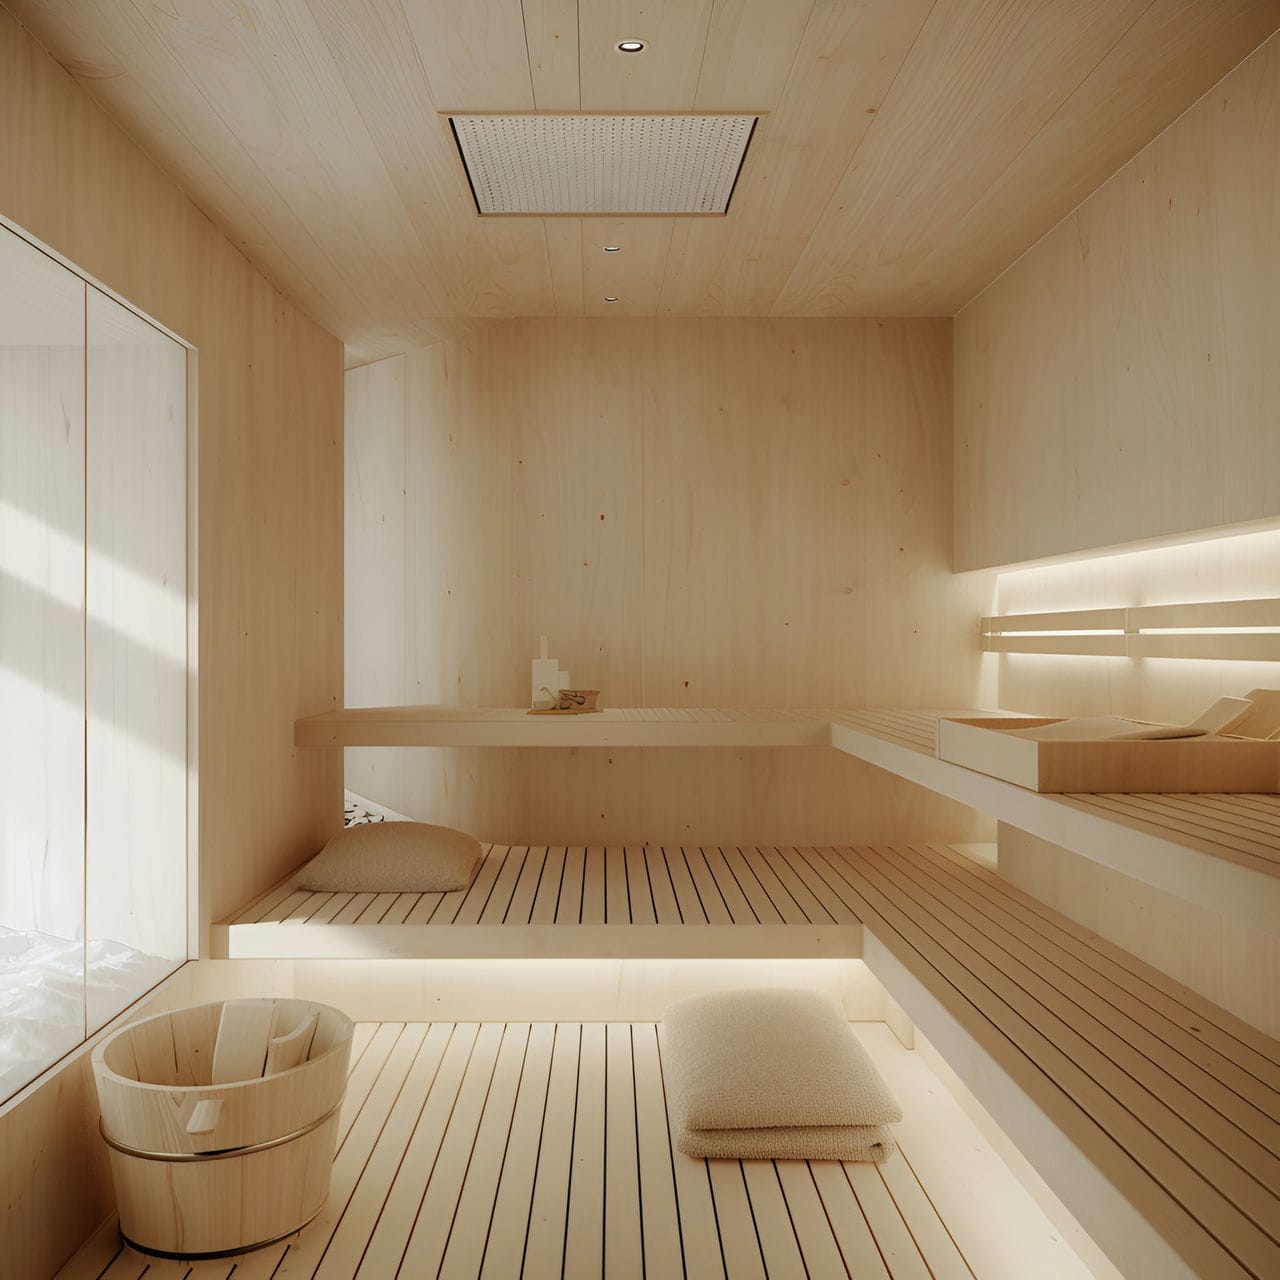 Sauna room: size, functionality, uses, furniture and renovation